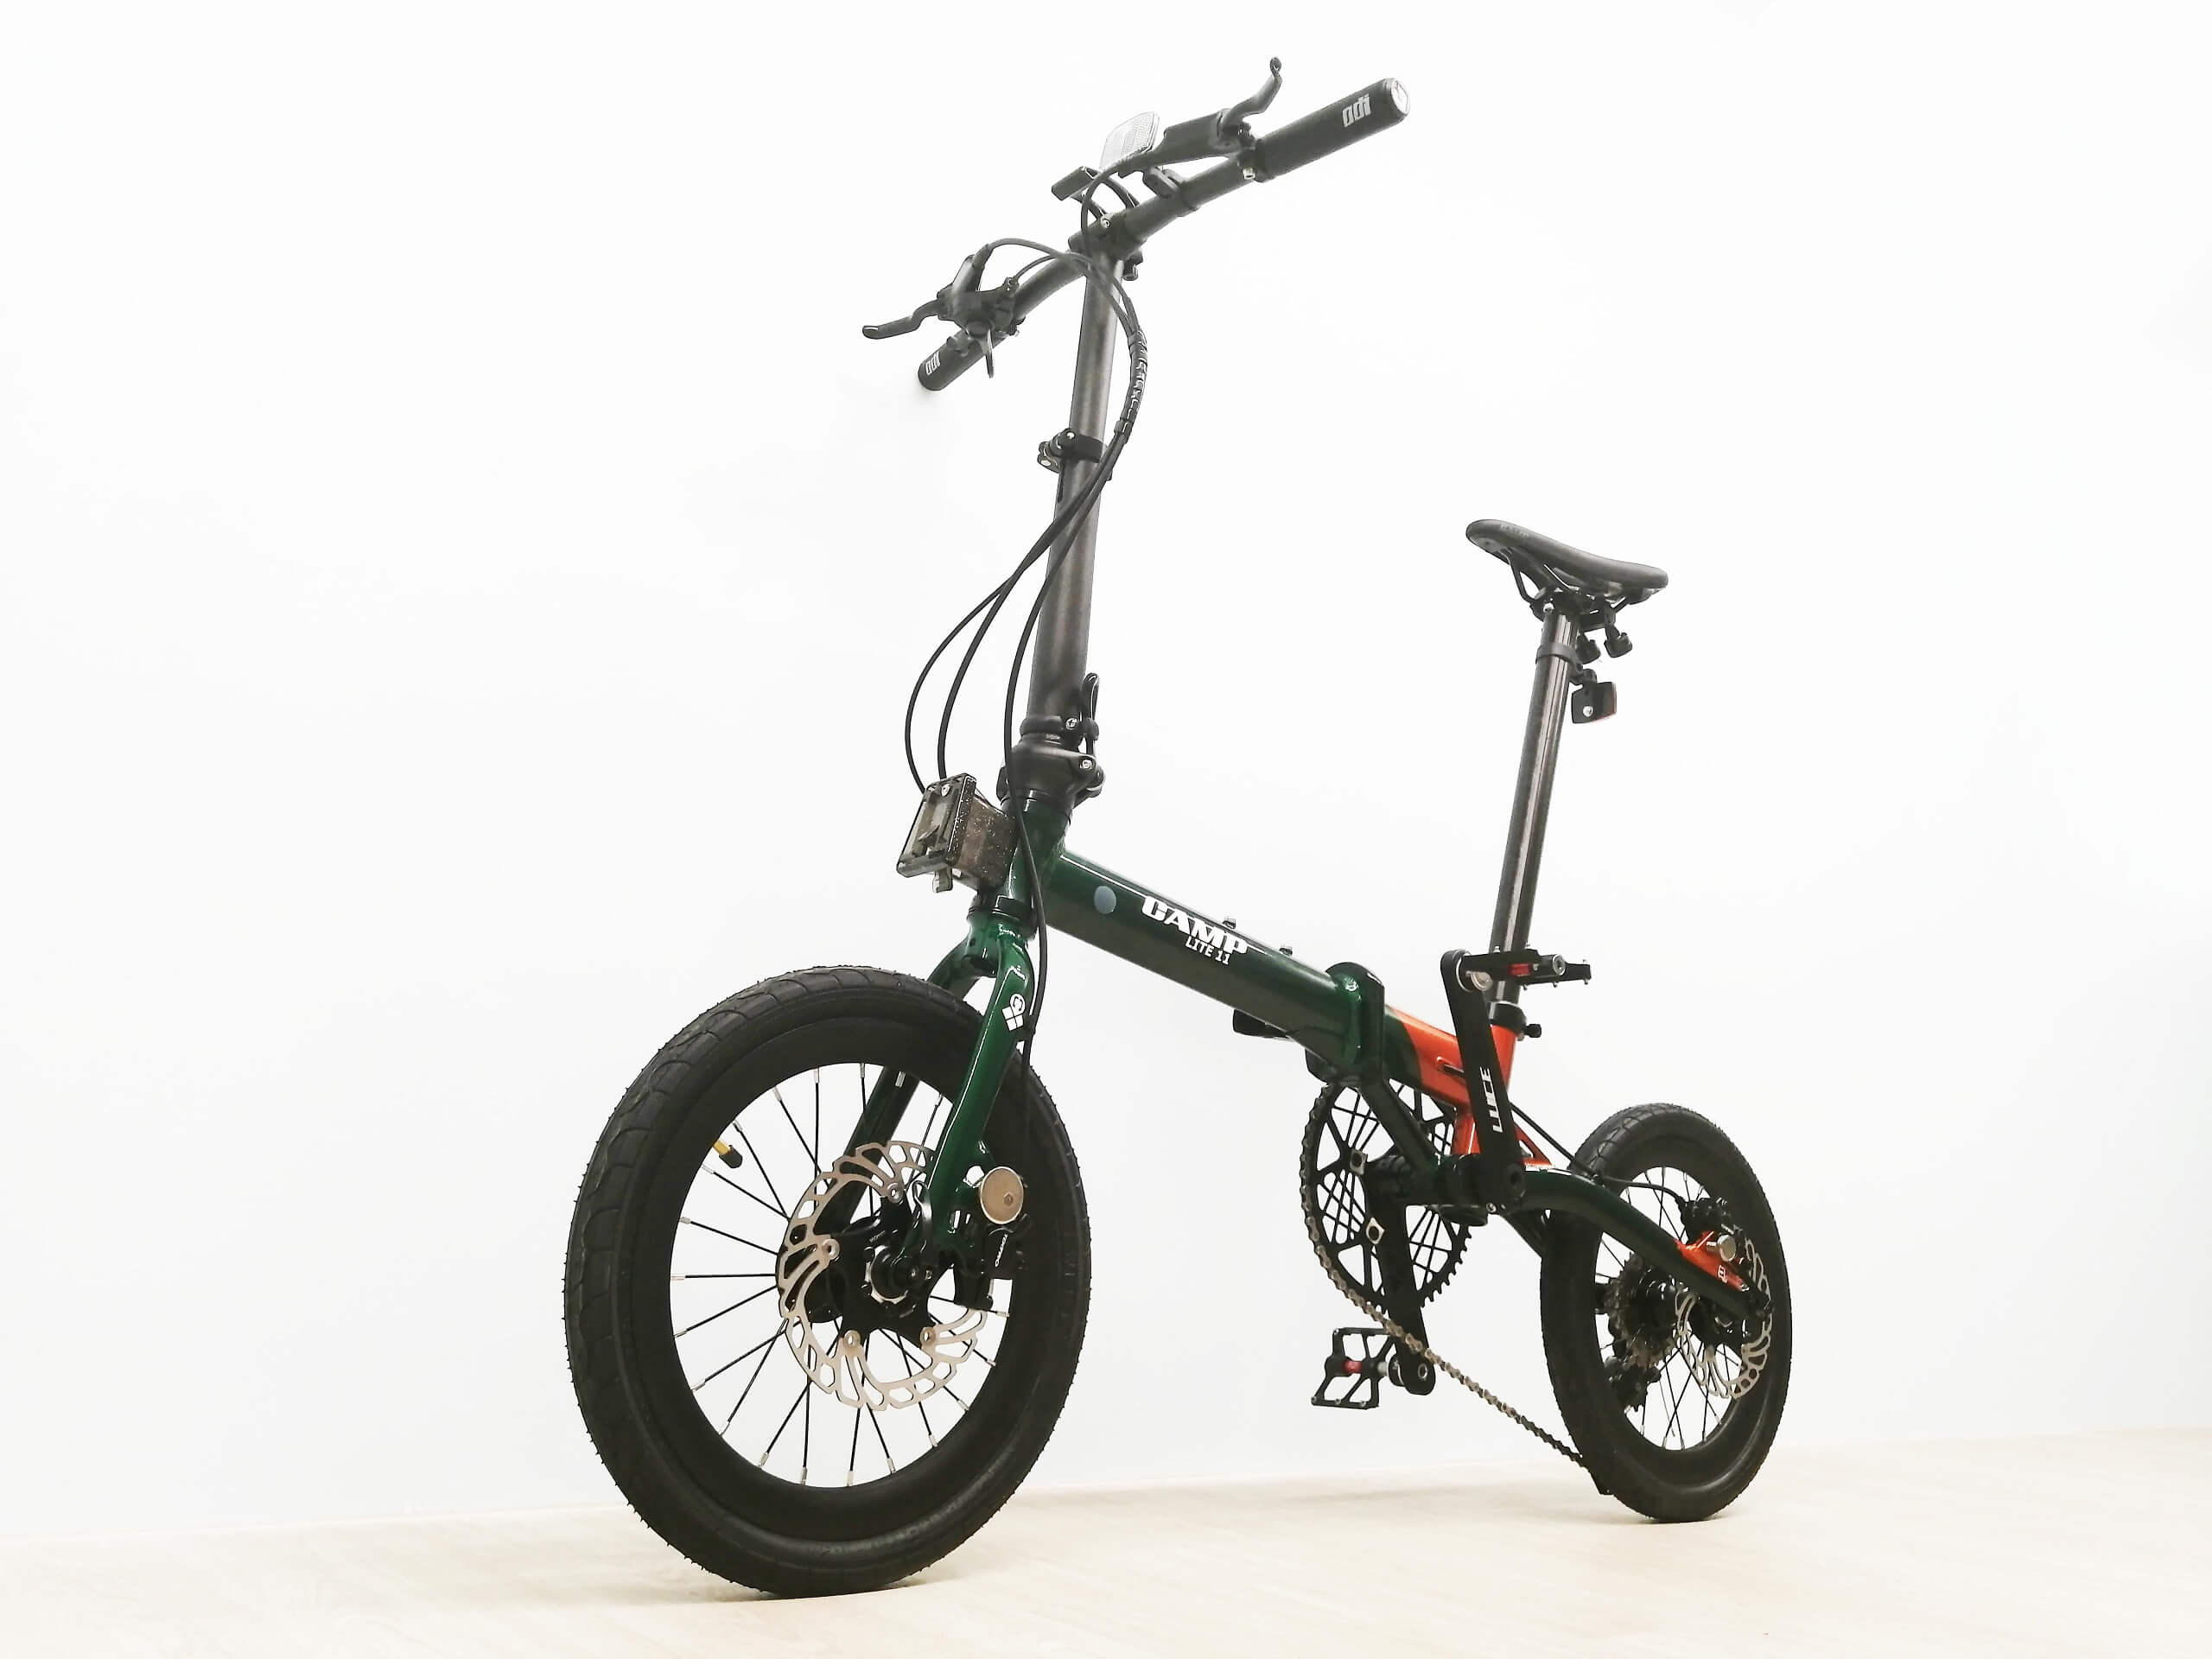 CAMP LITE 11 lightweight foldable bicycle angled left